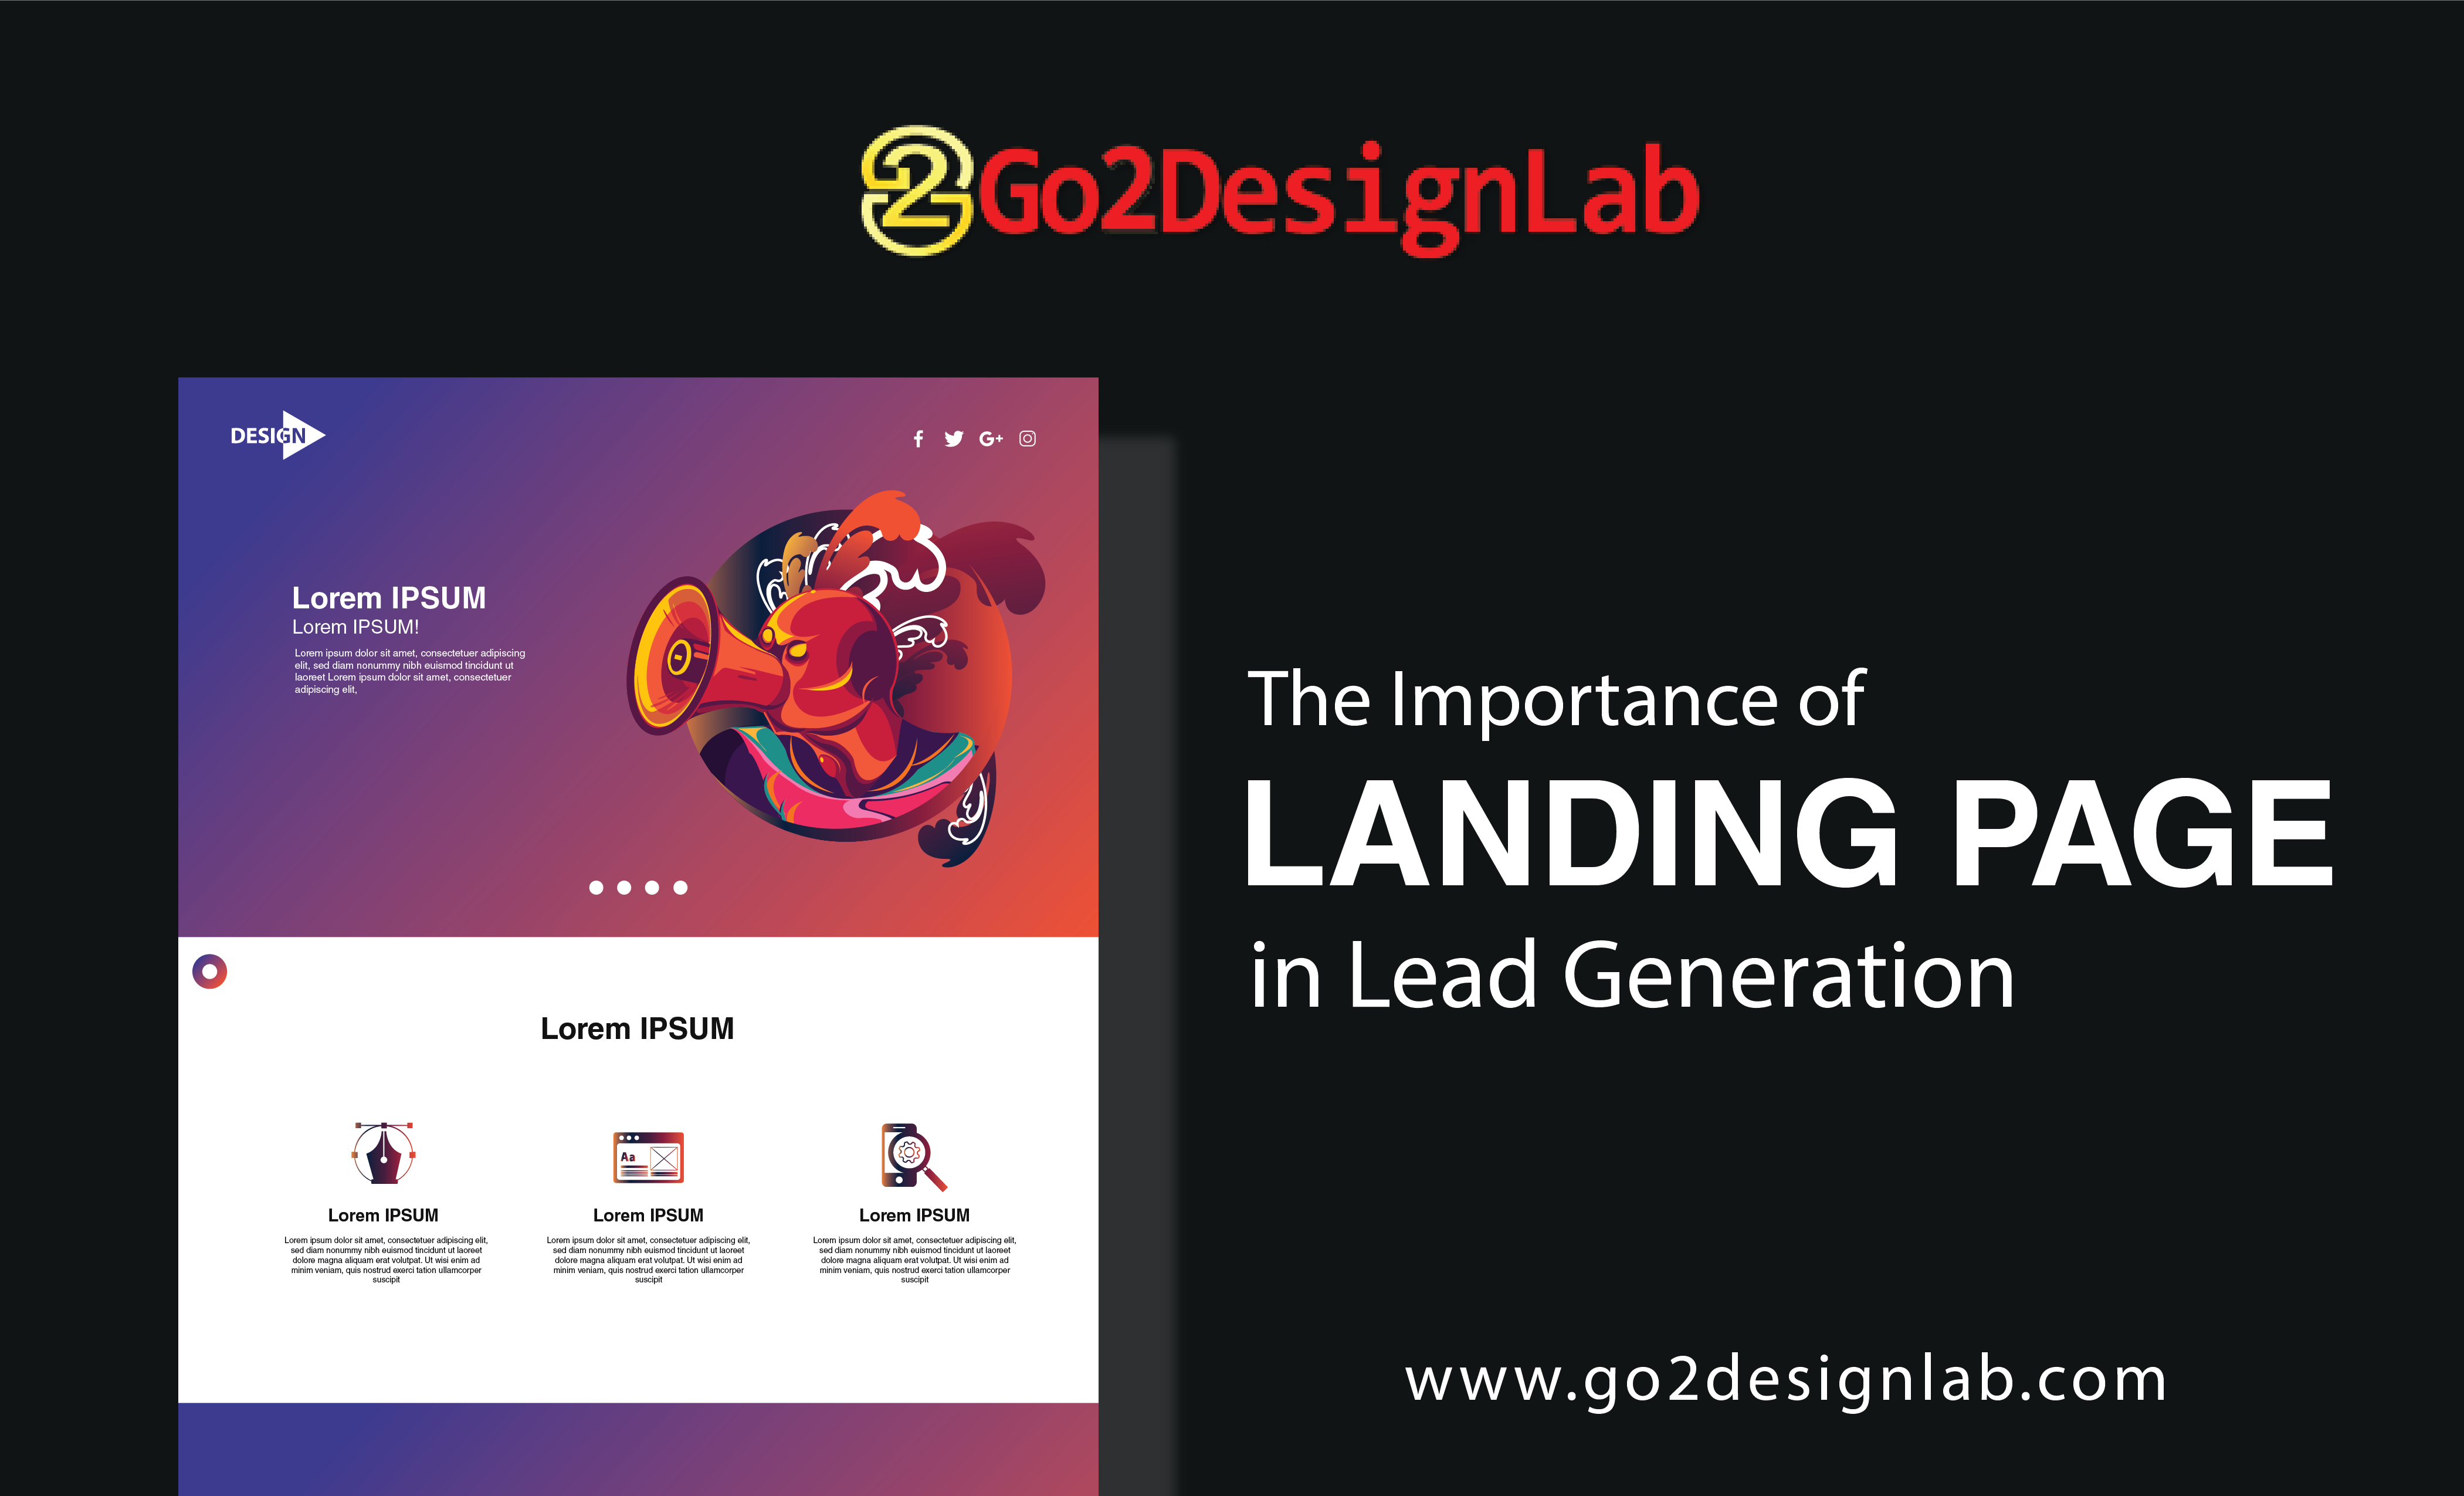 Importance of Landing Page in Lead Generation